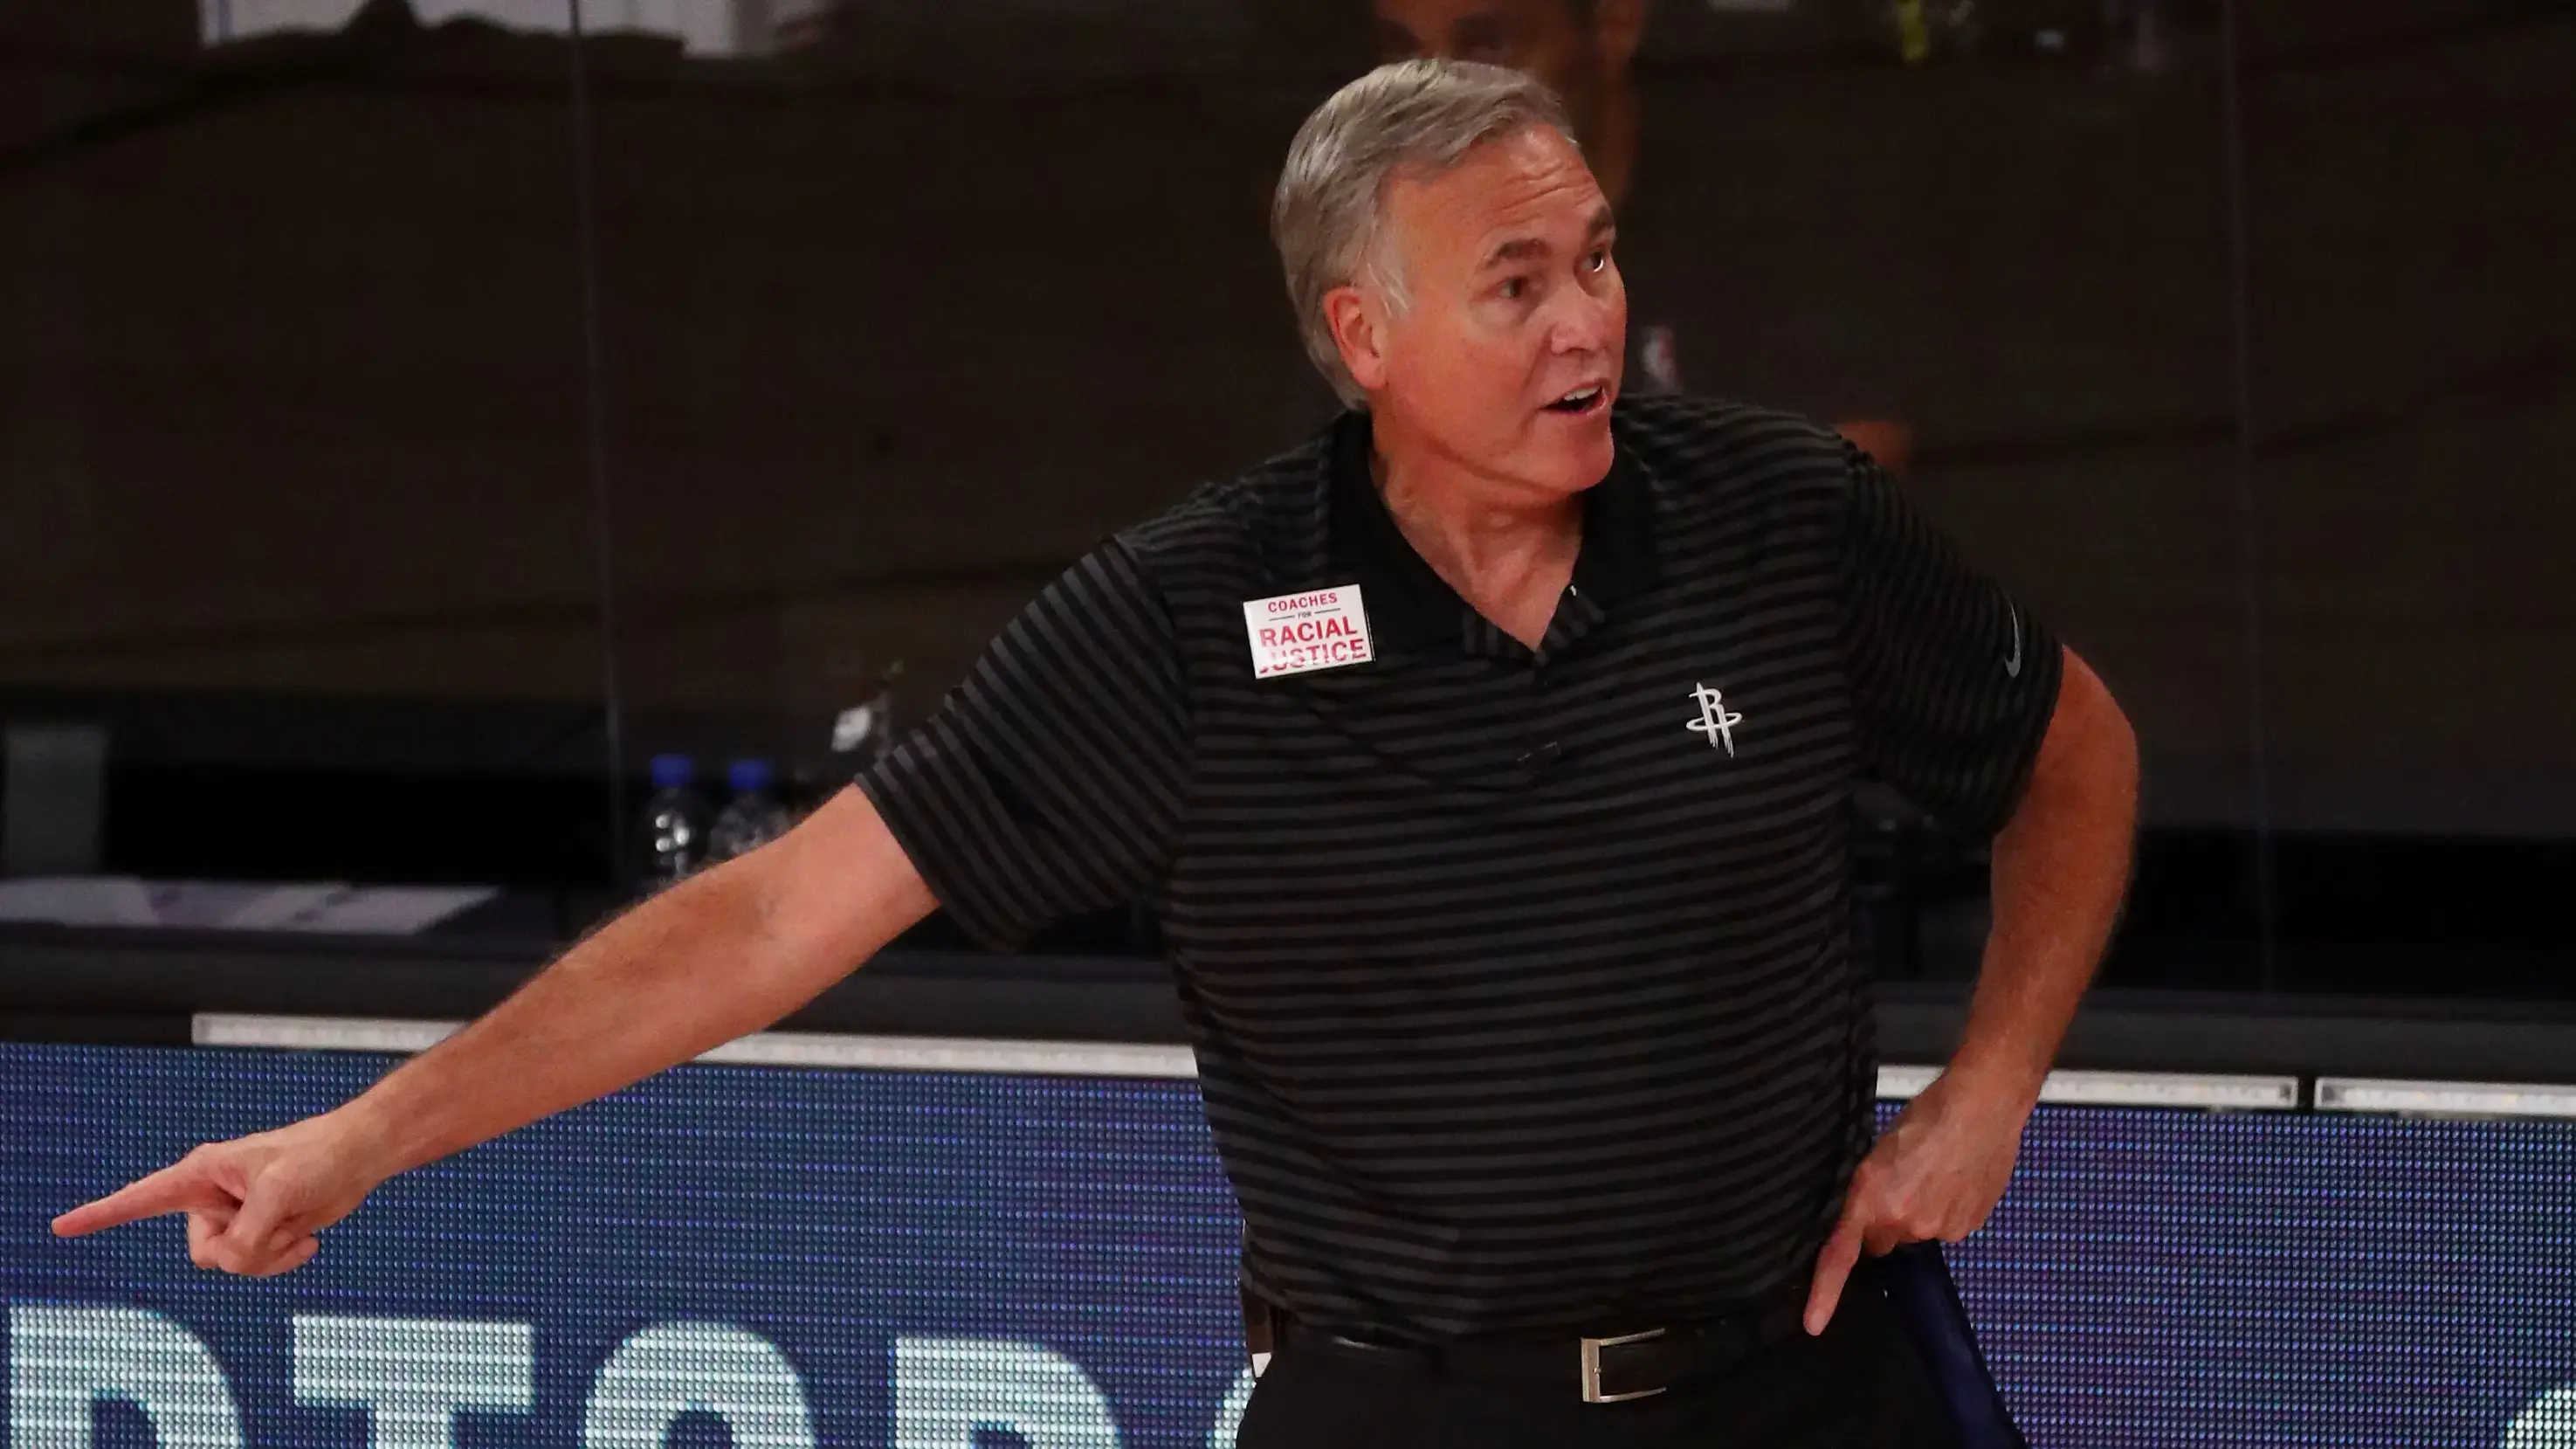 Sep 2, 2020; Lake Buena Vista, Florida, USA; Houston Rockets head coach Mike D'Antoni reacts during the first half of game seven of the first round of the 2020 NBA Playoffs against the Oklahoma City Thunder at ESPN Wide World of Sports Complex. / © Kim Klement-USA TODAY Sports